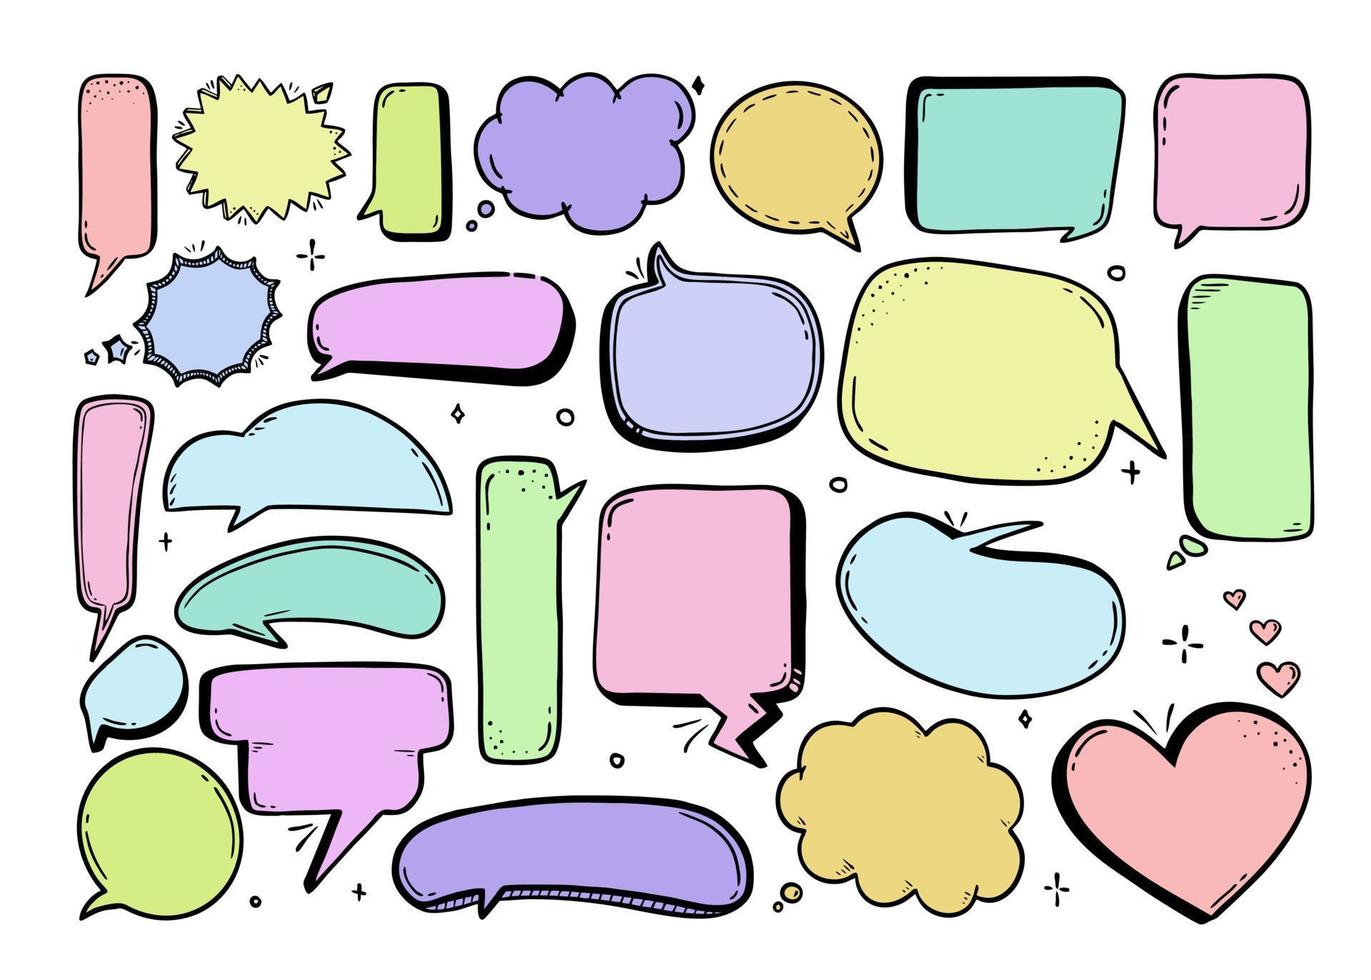 Comic speech bubble hand-drawn sketch in doodle style Vector illustration bubble chat, message element.